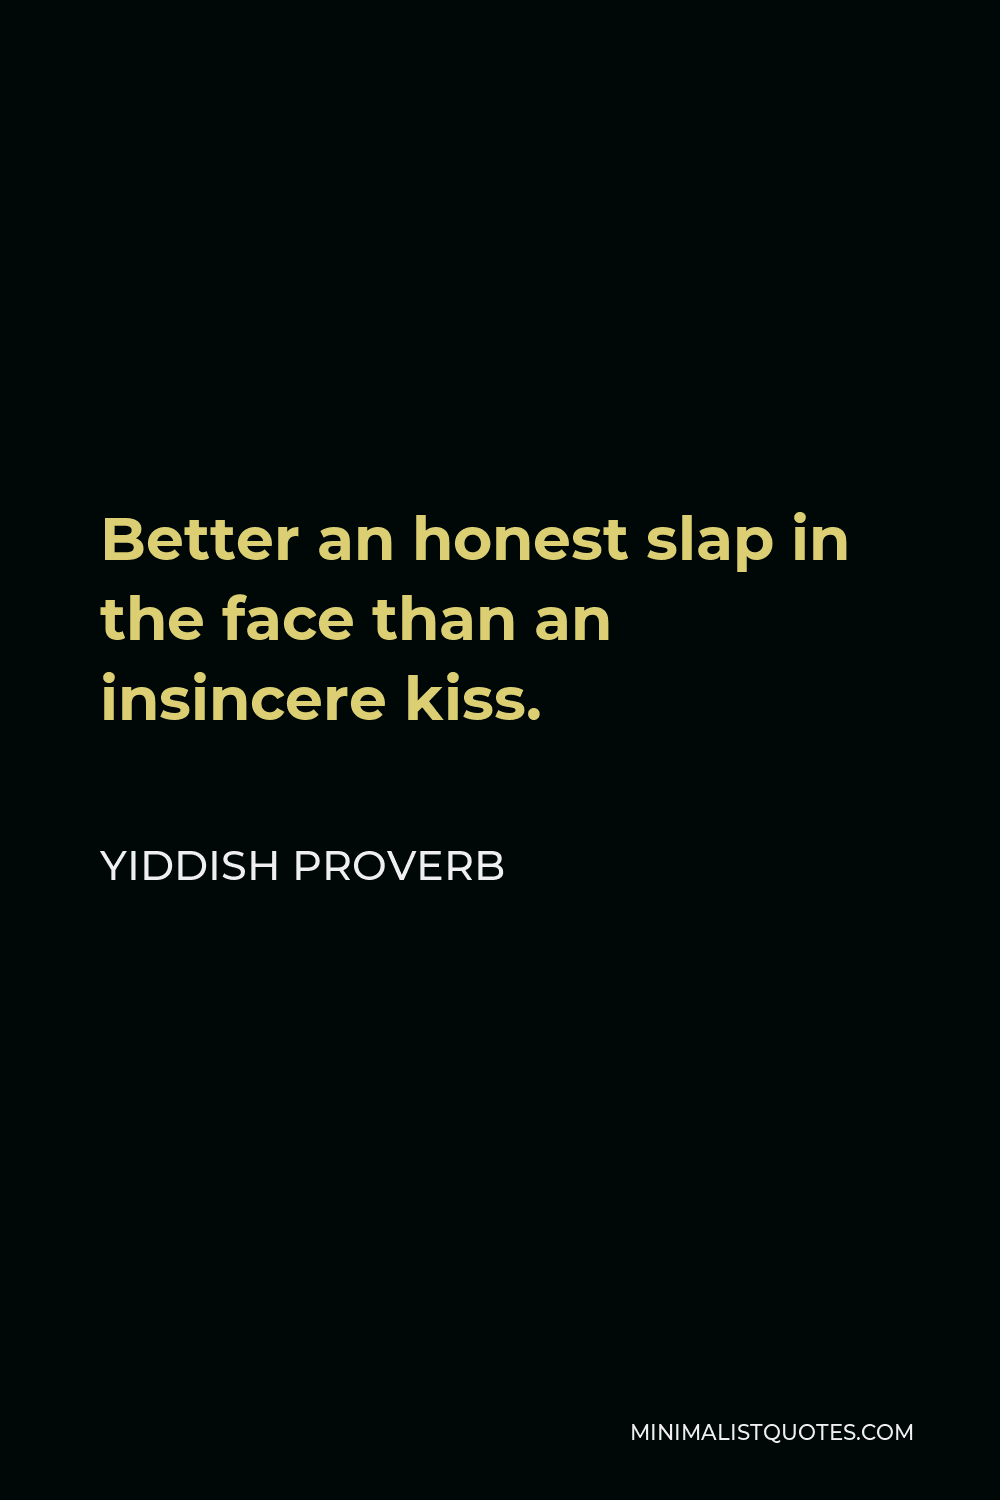 Yiddish Proverb Quote - Better an honest slap in the face than an insincere kiss.